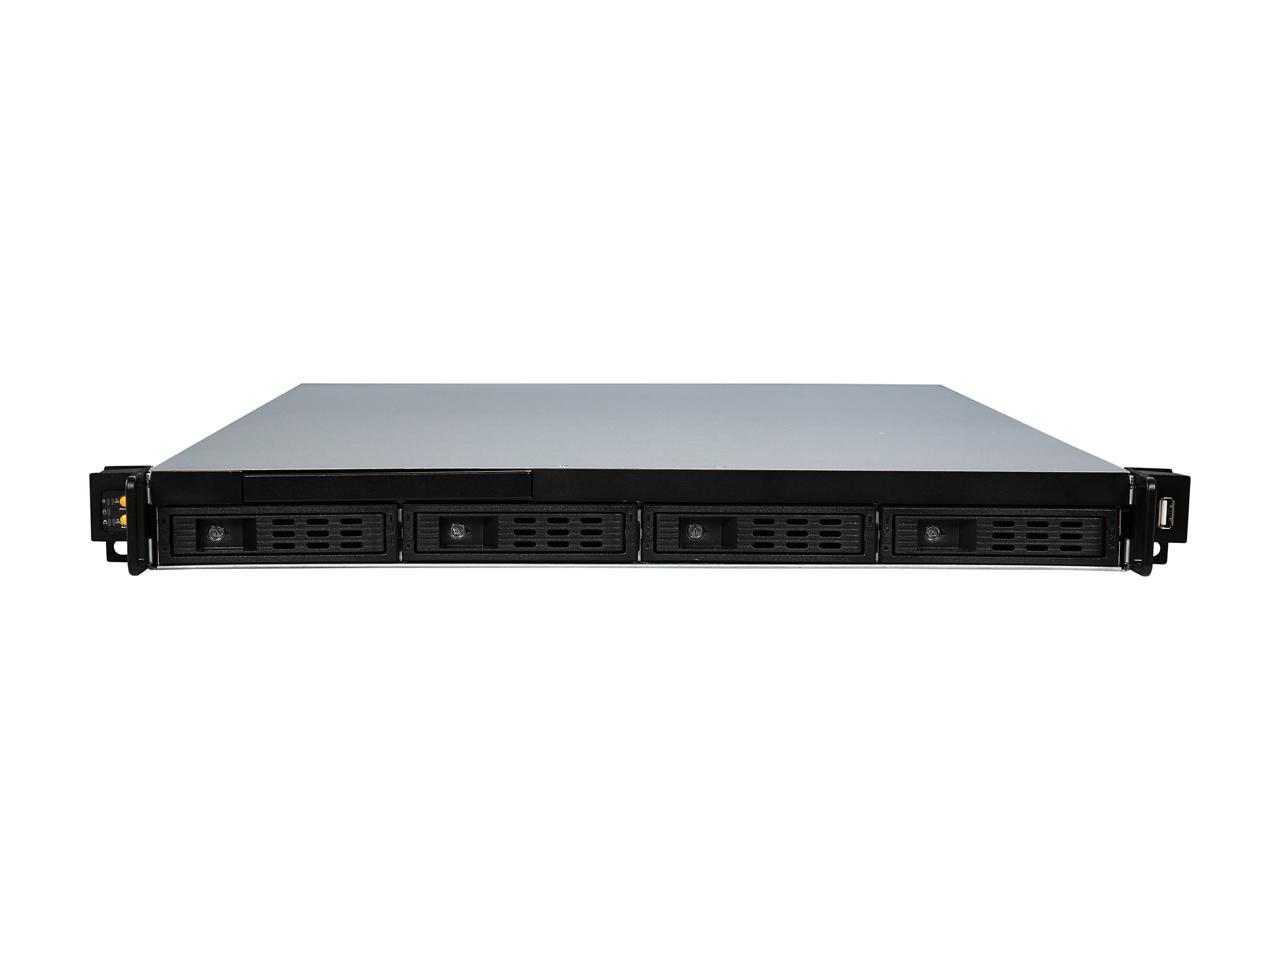 Athena Power Rm-1U1043He12 12Gb/S 1U Hot-Swap 4-Bay E-Atx Rackmount Server Chassis - Oem